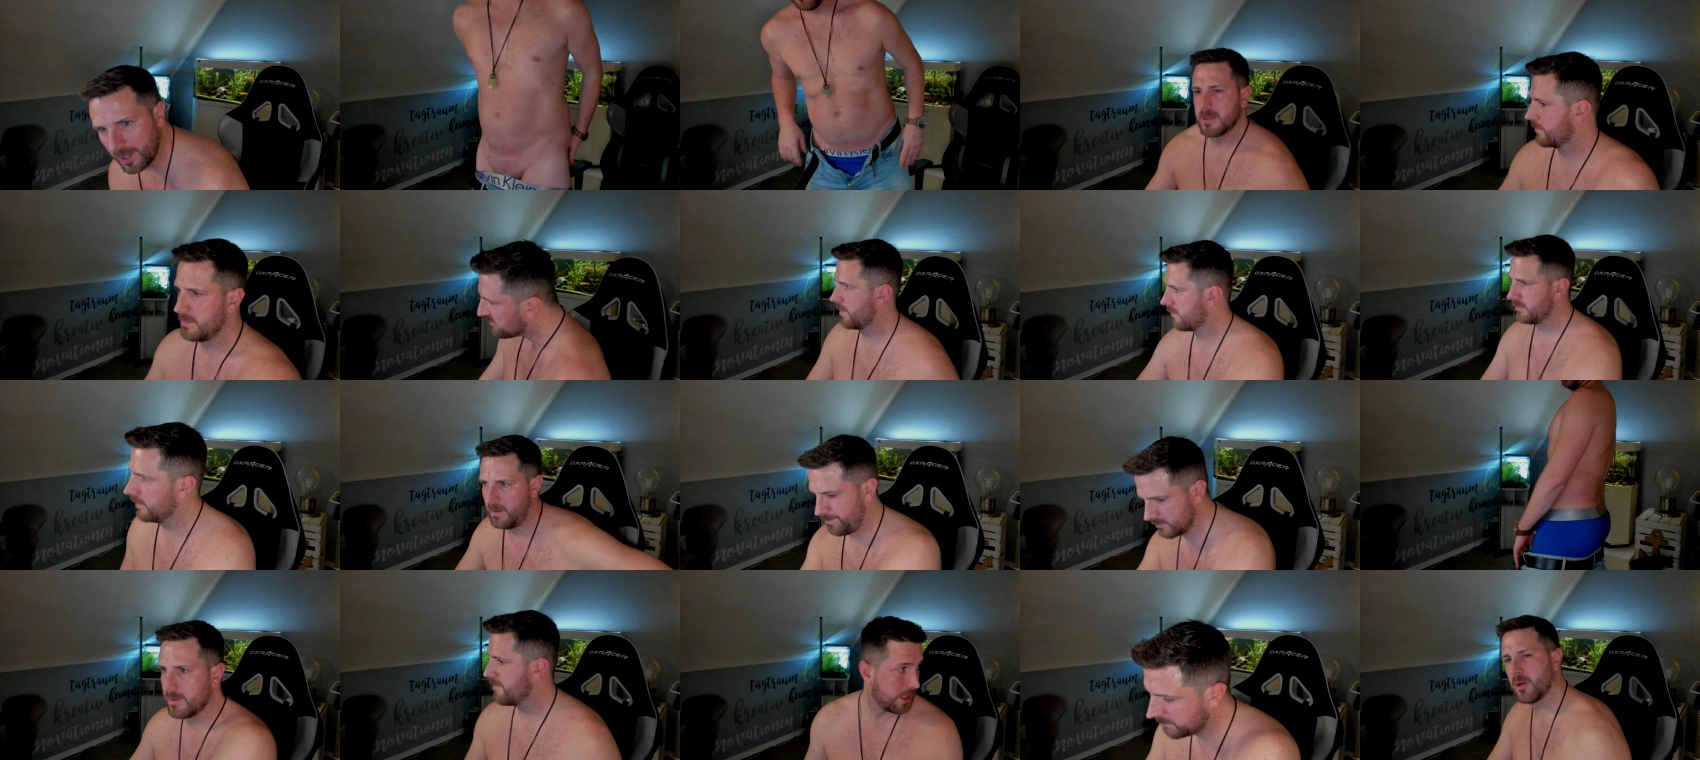 ronhill13 28-12-2023 Recorded Video gay